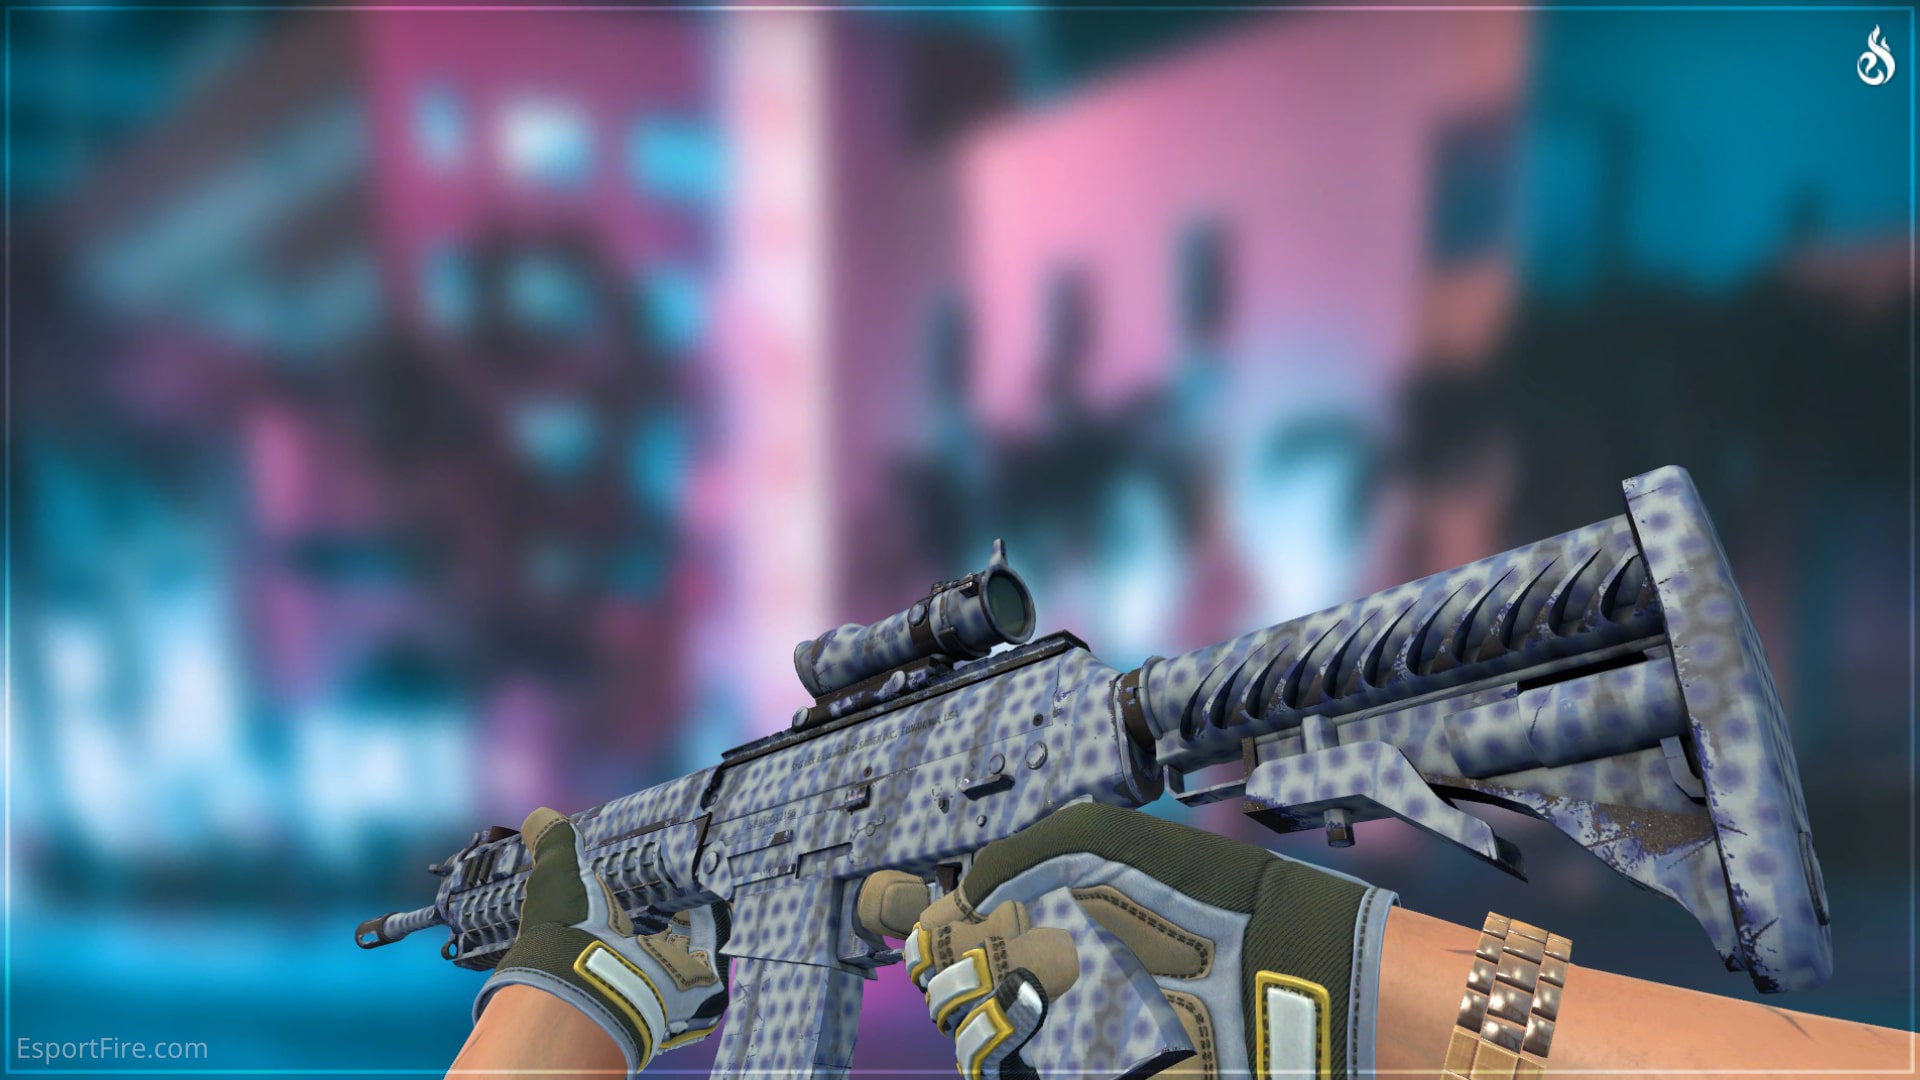 Counter-Strike SG 553 Waves Perforated